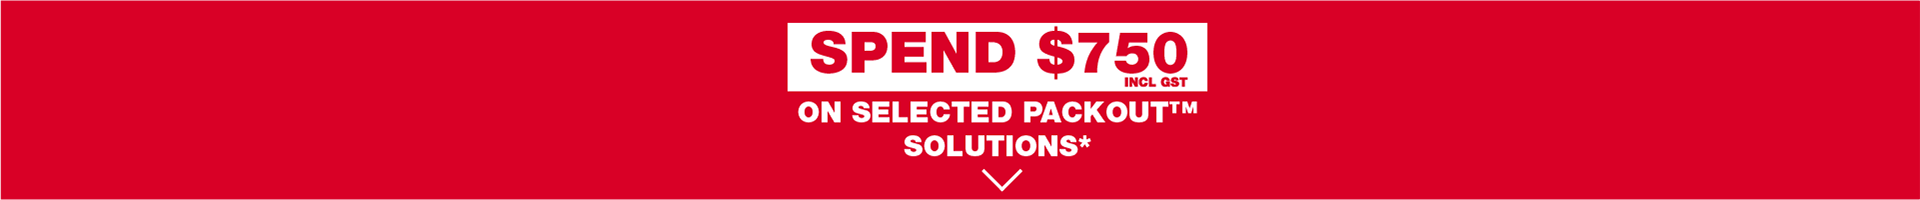 Spend $750 on selected PACKOUT Solutions